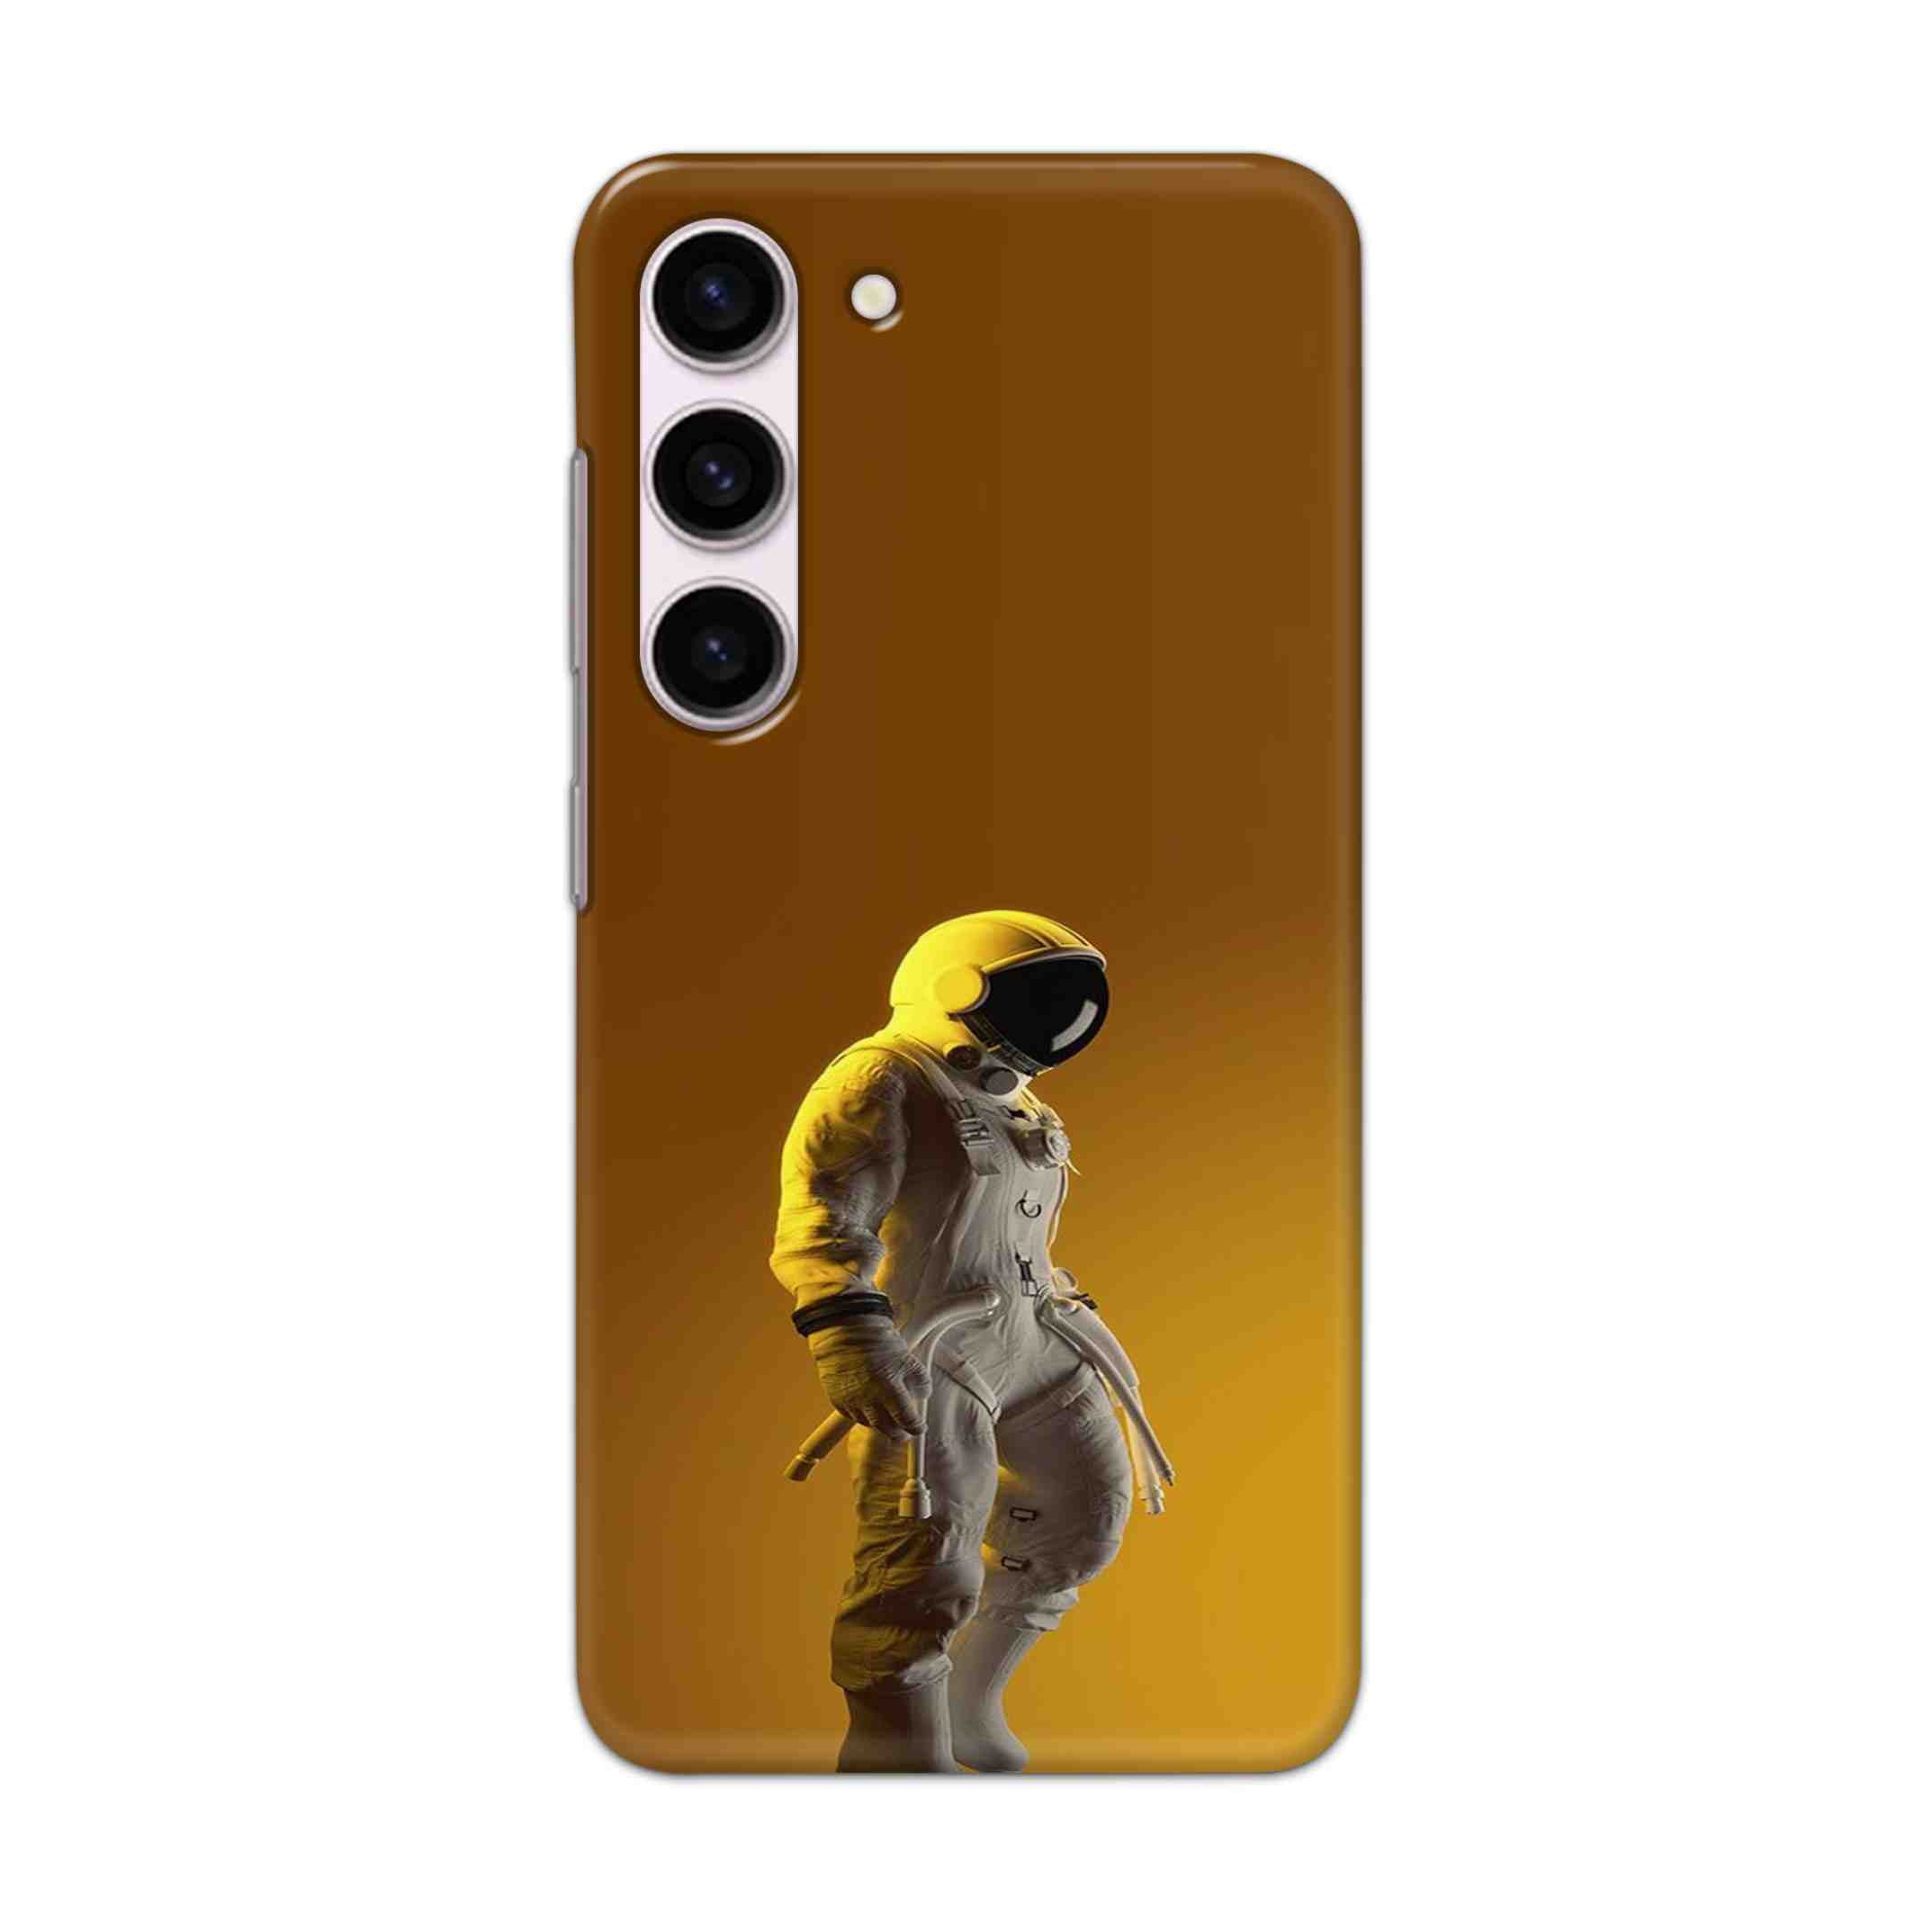 Buy Yellow Astronaut Hard Back Mobile Phone Case Cover For Samsung Galaxy S23 Online